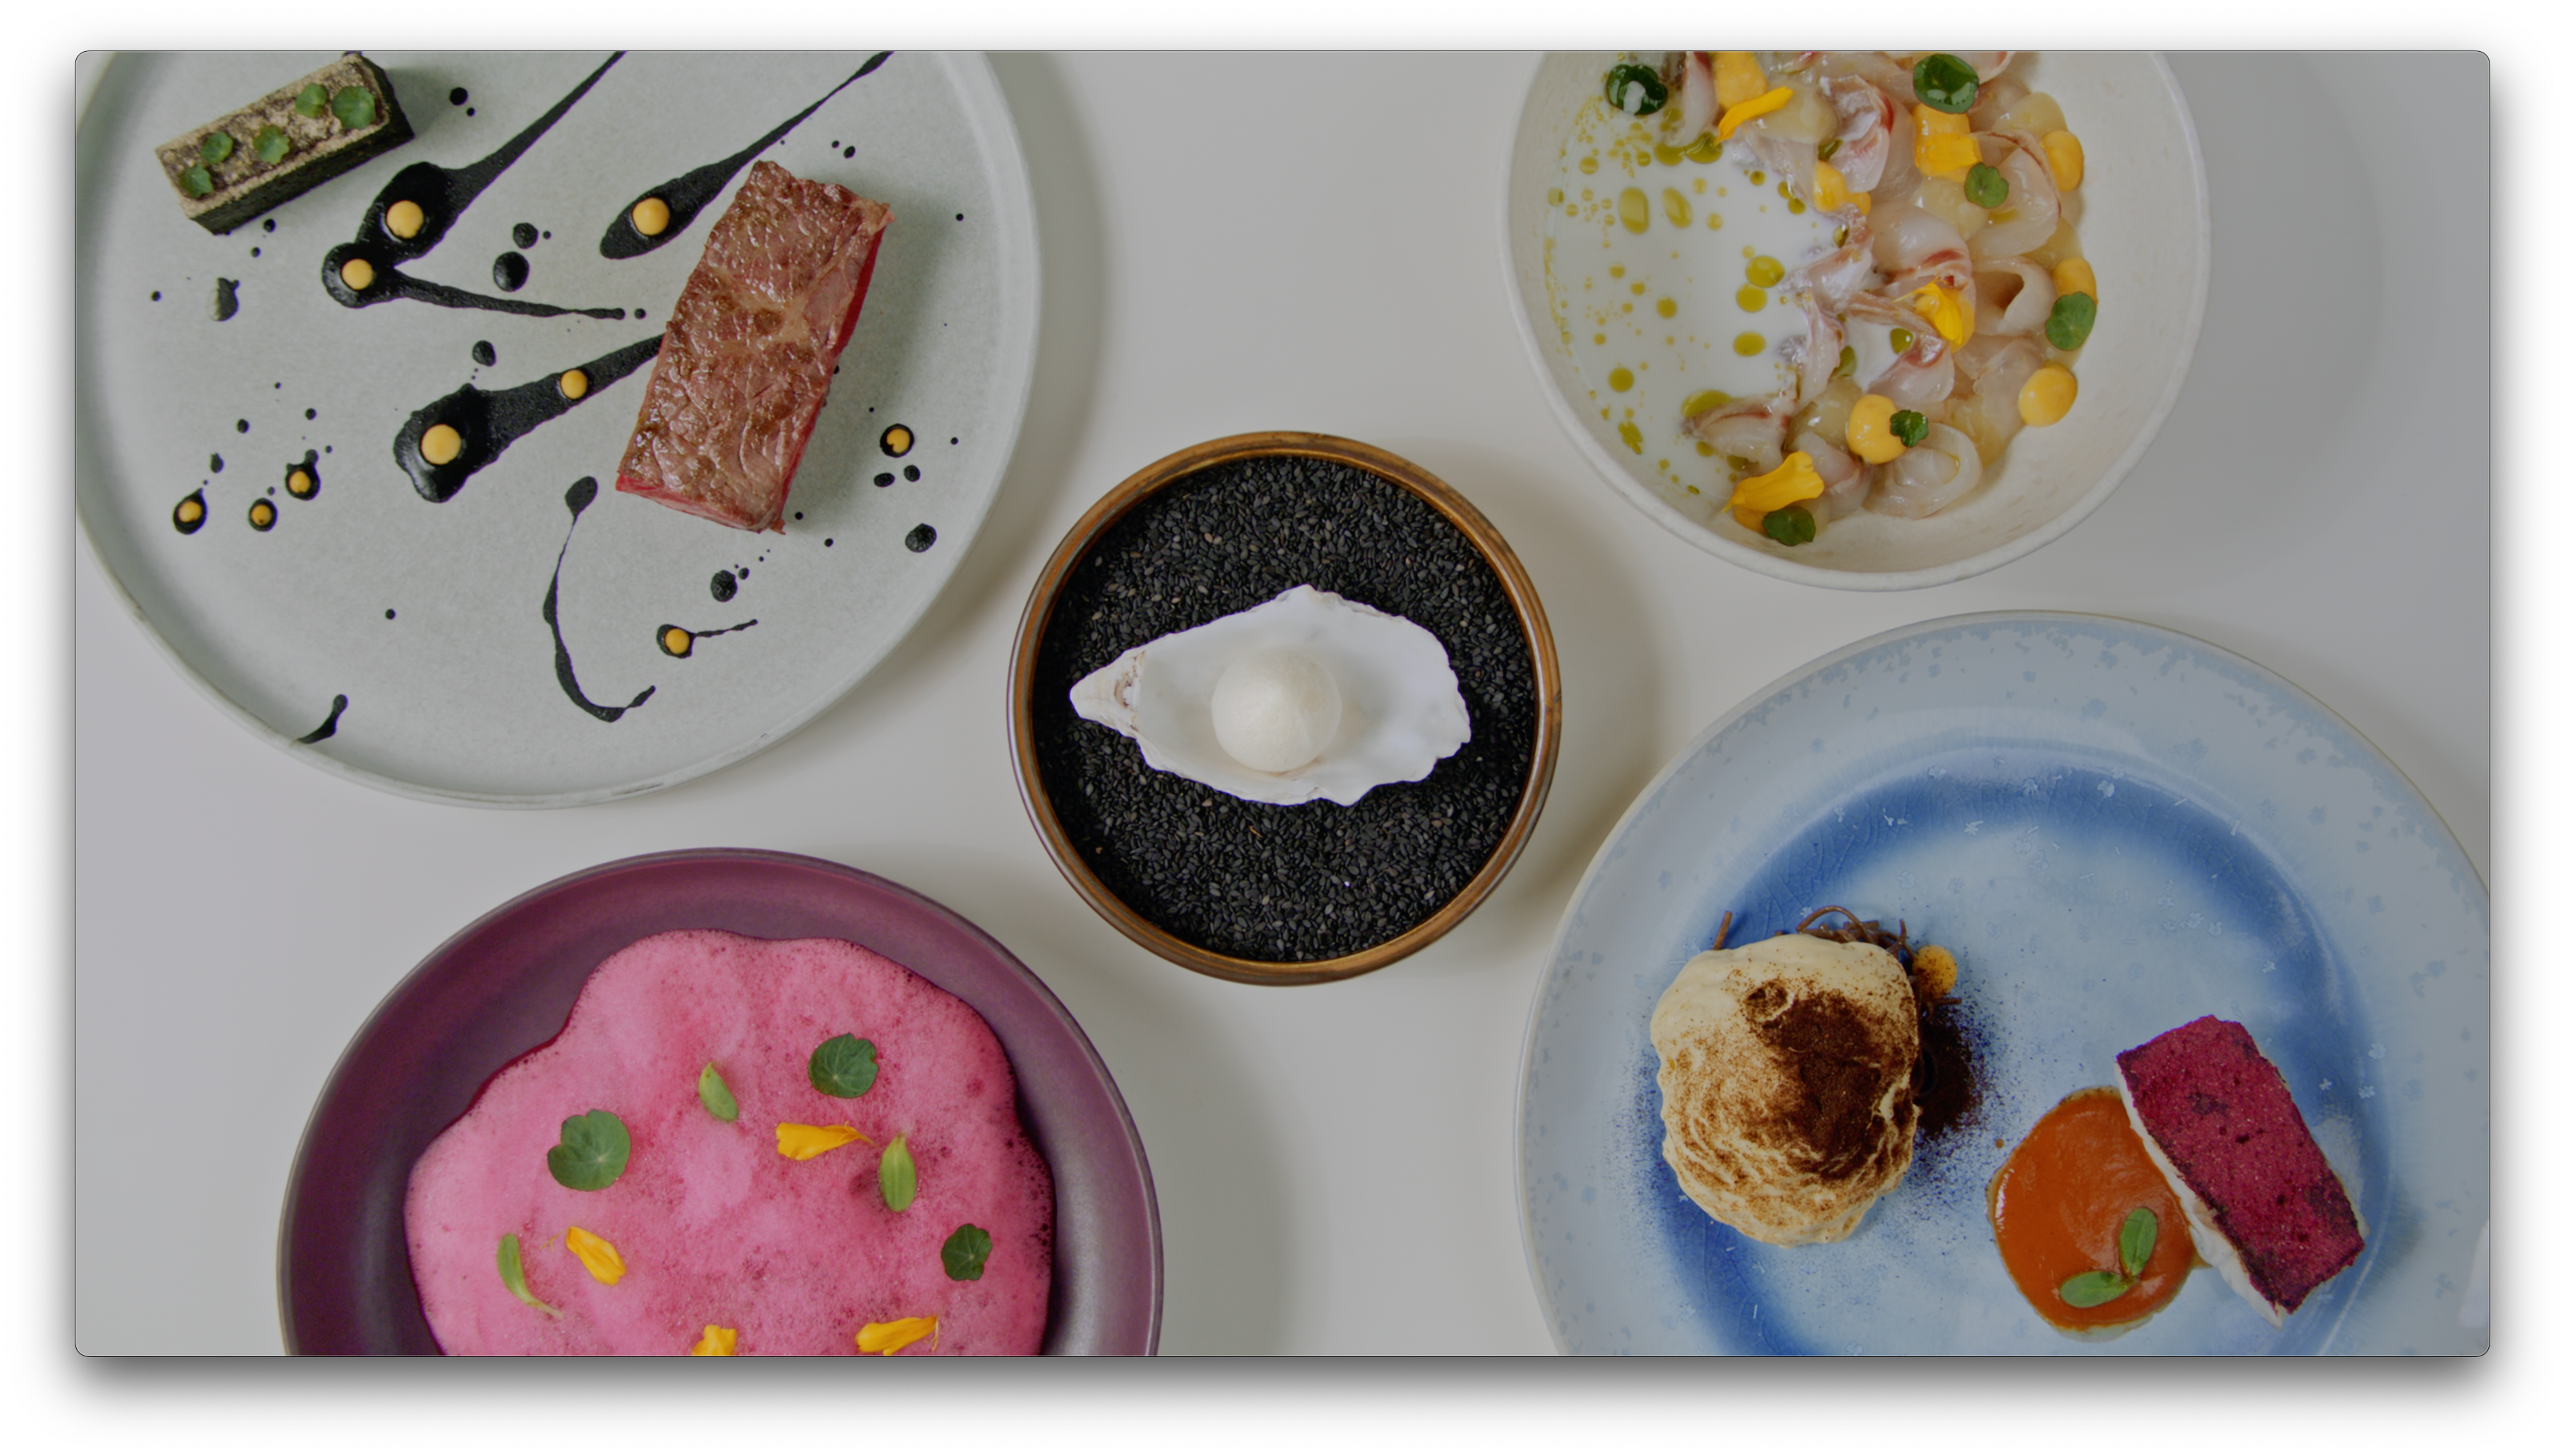 Different dishes prepared by Gerson Atalaya, a graduate of the Pachacútec Institute of Culinary Arts, at the Kay restaurant in Luxembourg.